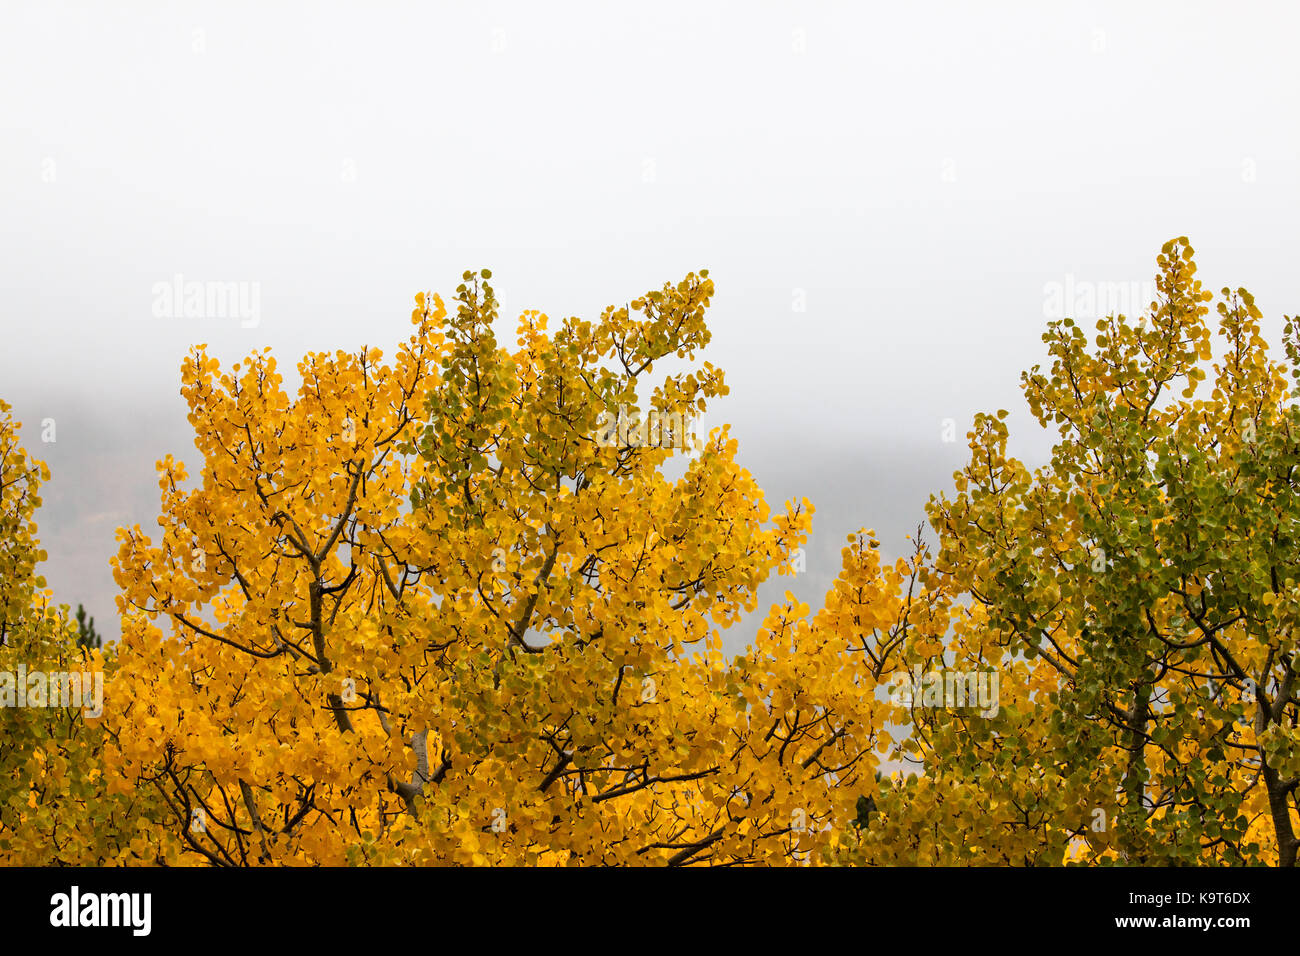 Aspen leaves changing from green to golden in autumn in rural Montana with a foggy background. Stock Photo